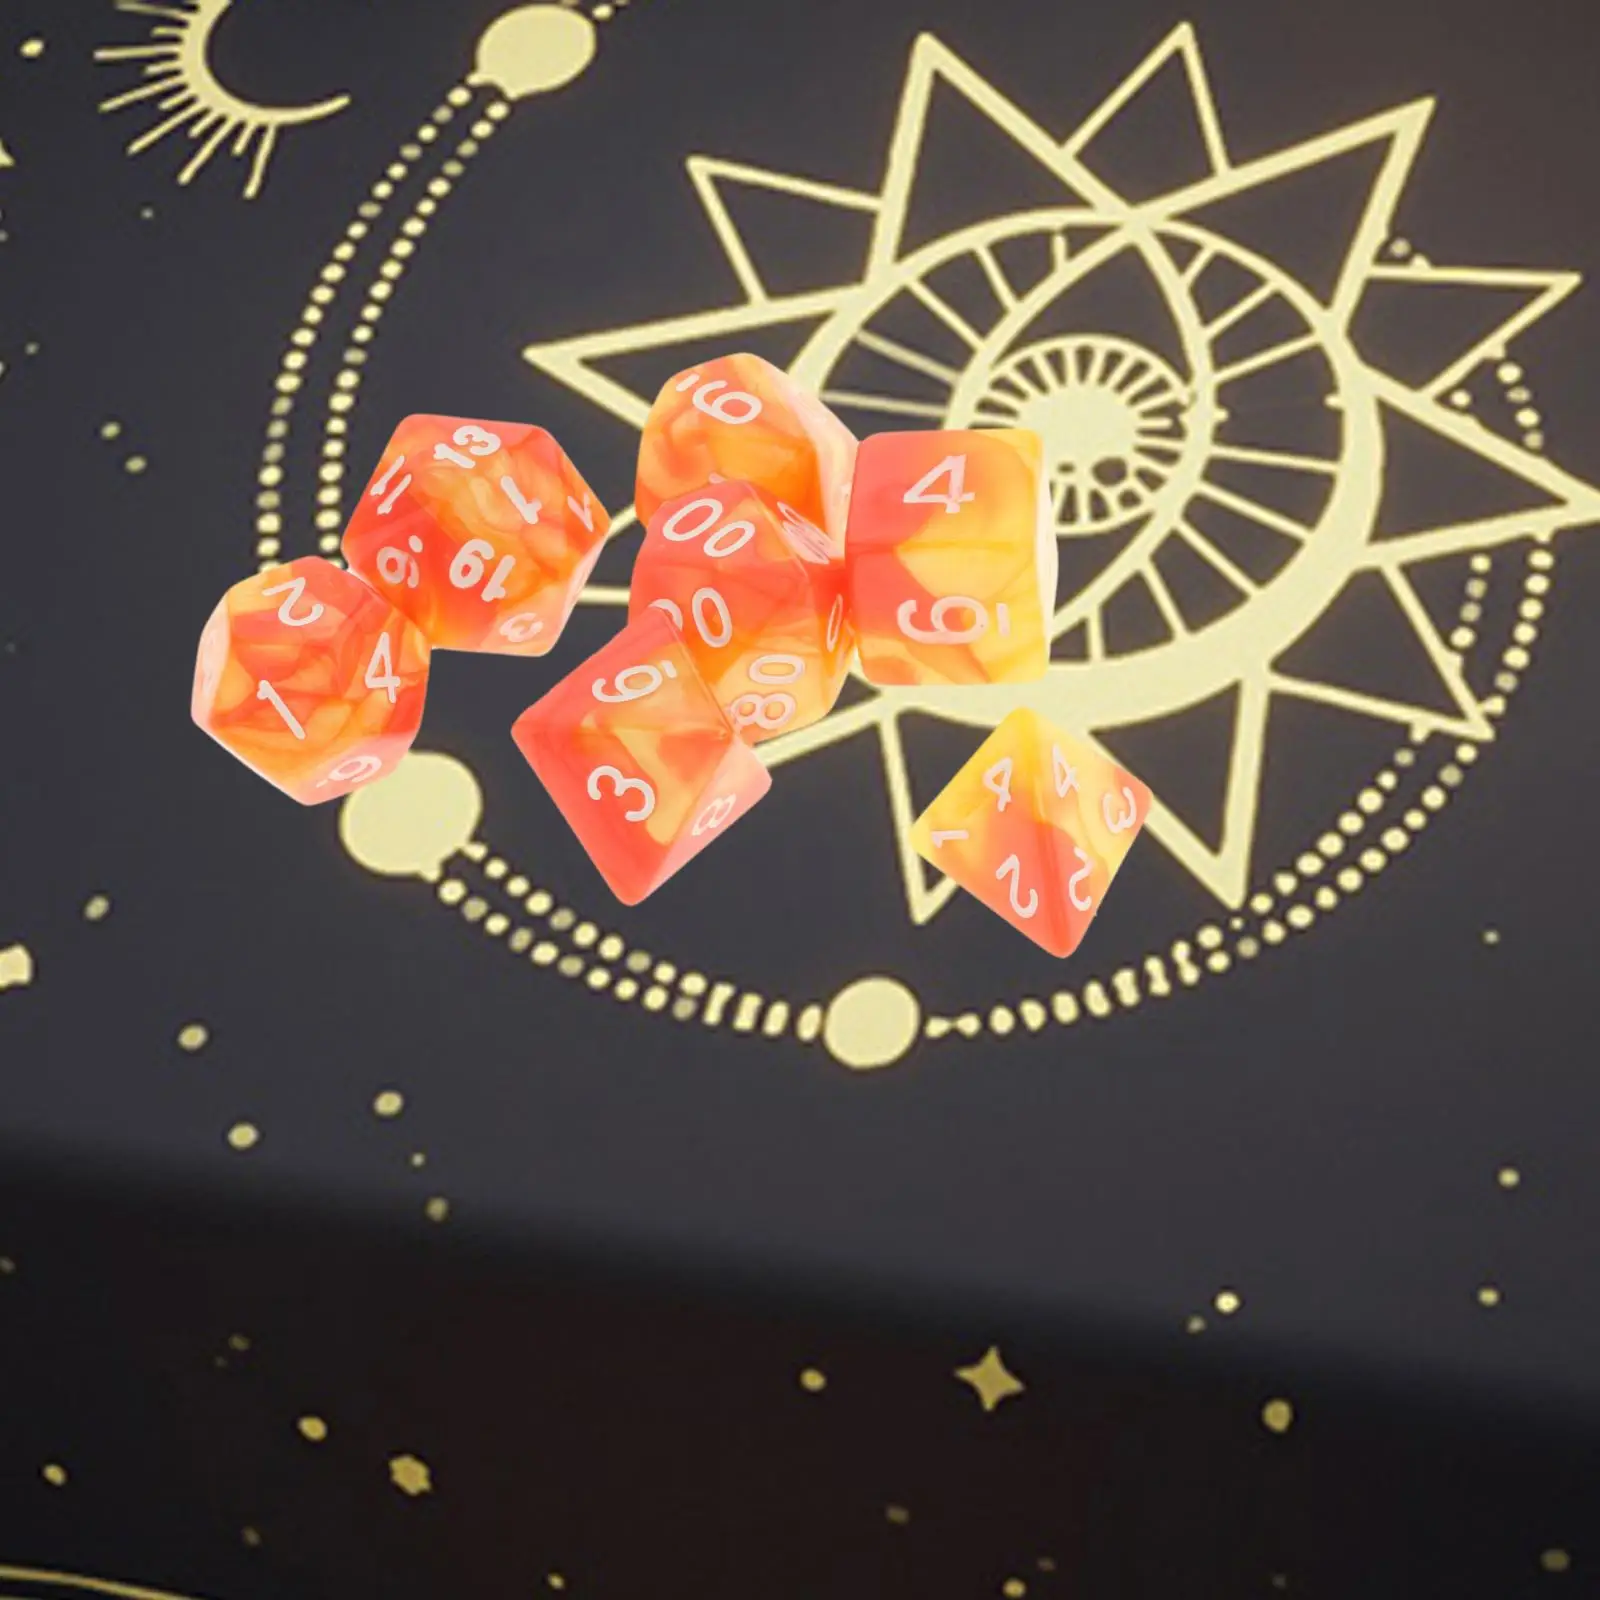 7Pcs Polyhedral Numeral Dice Set D4 D6 D8 D10 D12 D20 for Party Board Game Toy Props Supplies